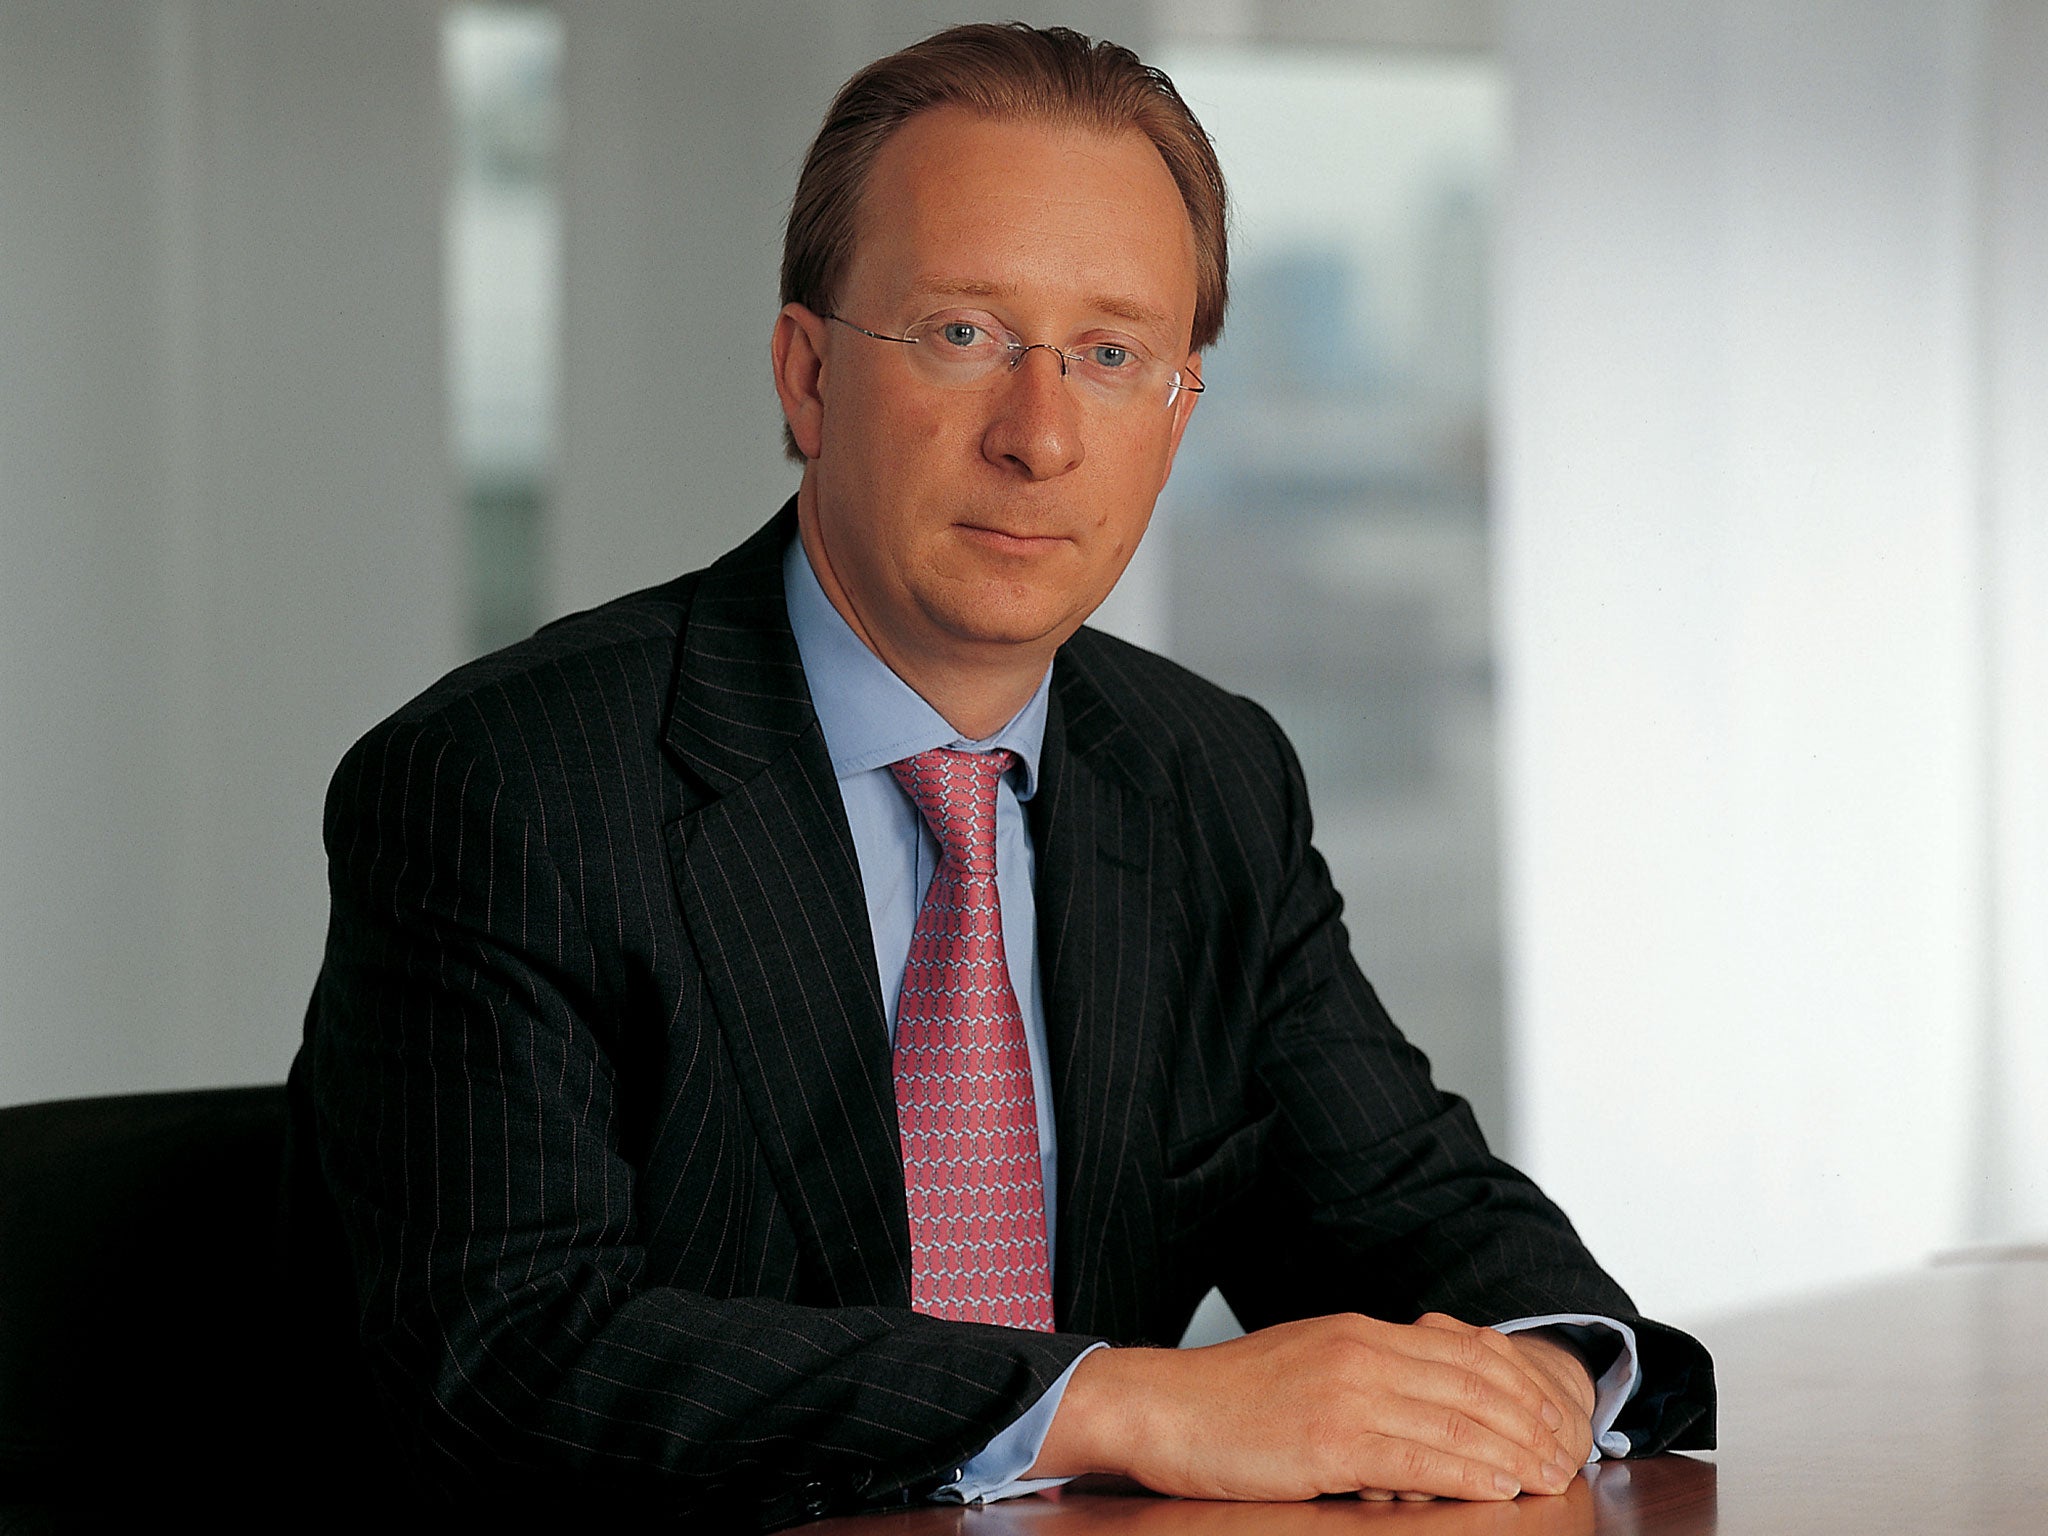 Richard Woolnough was paid £15.4m last year, making him one of the City’s highest earners